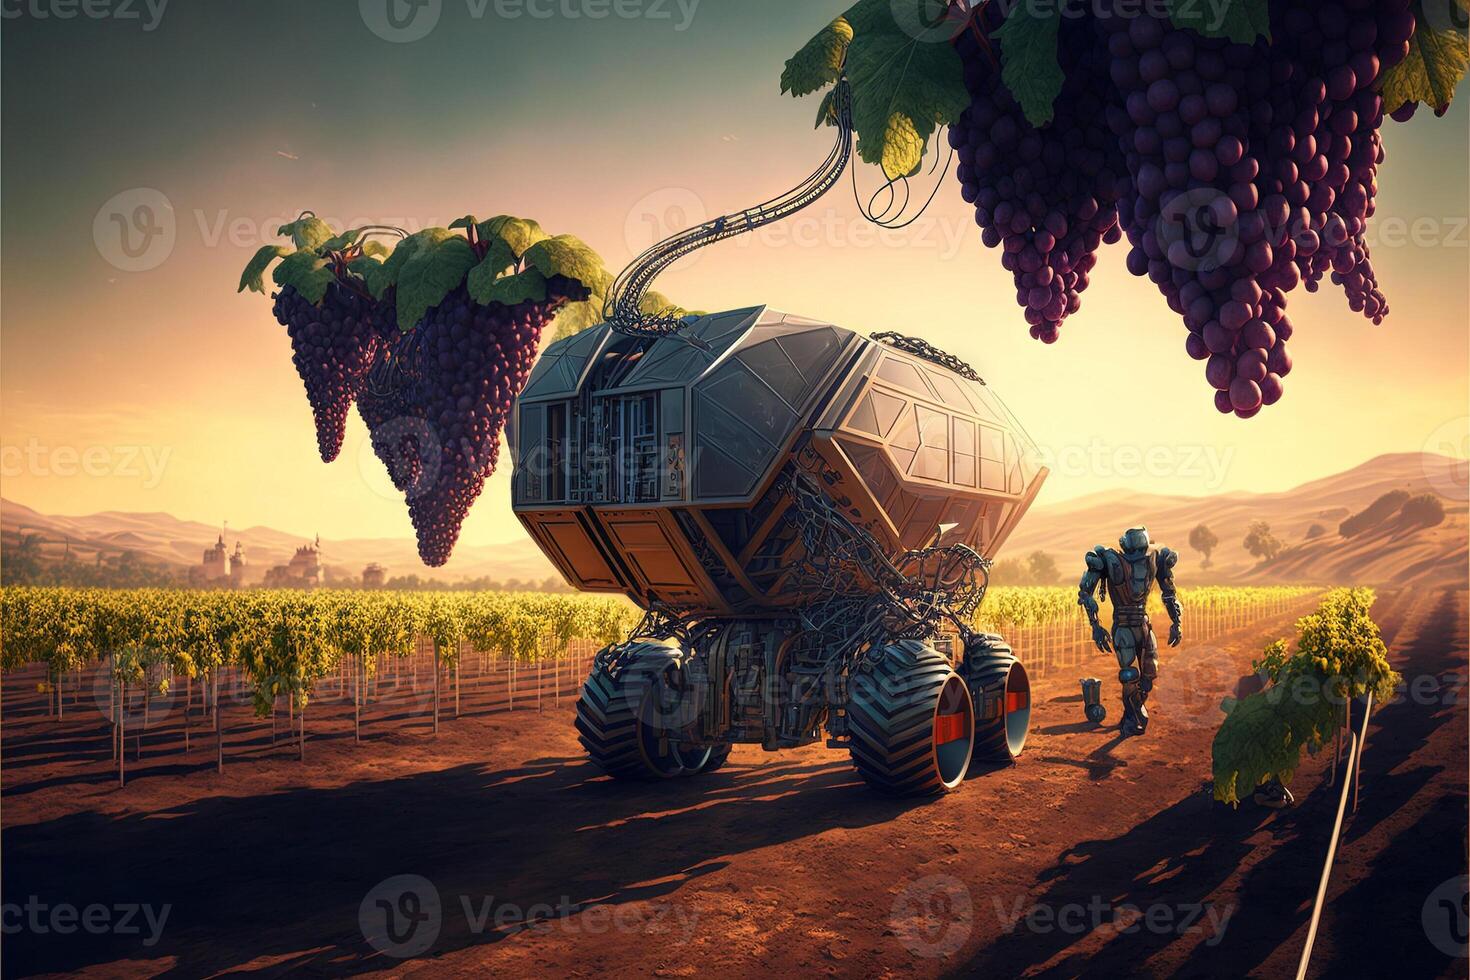 future vineyard where technology is used, robots are harvesting grapes llustration photo